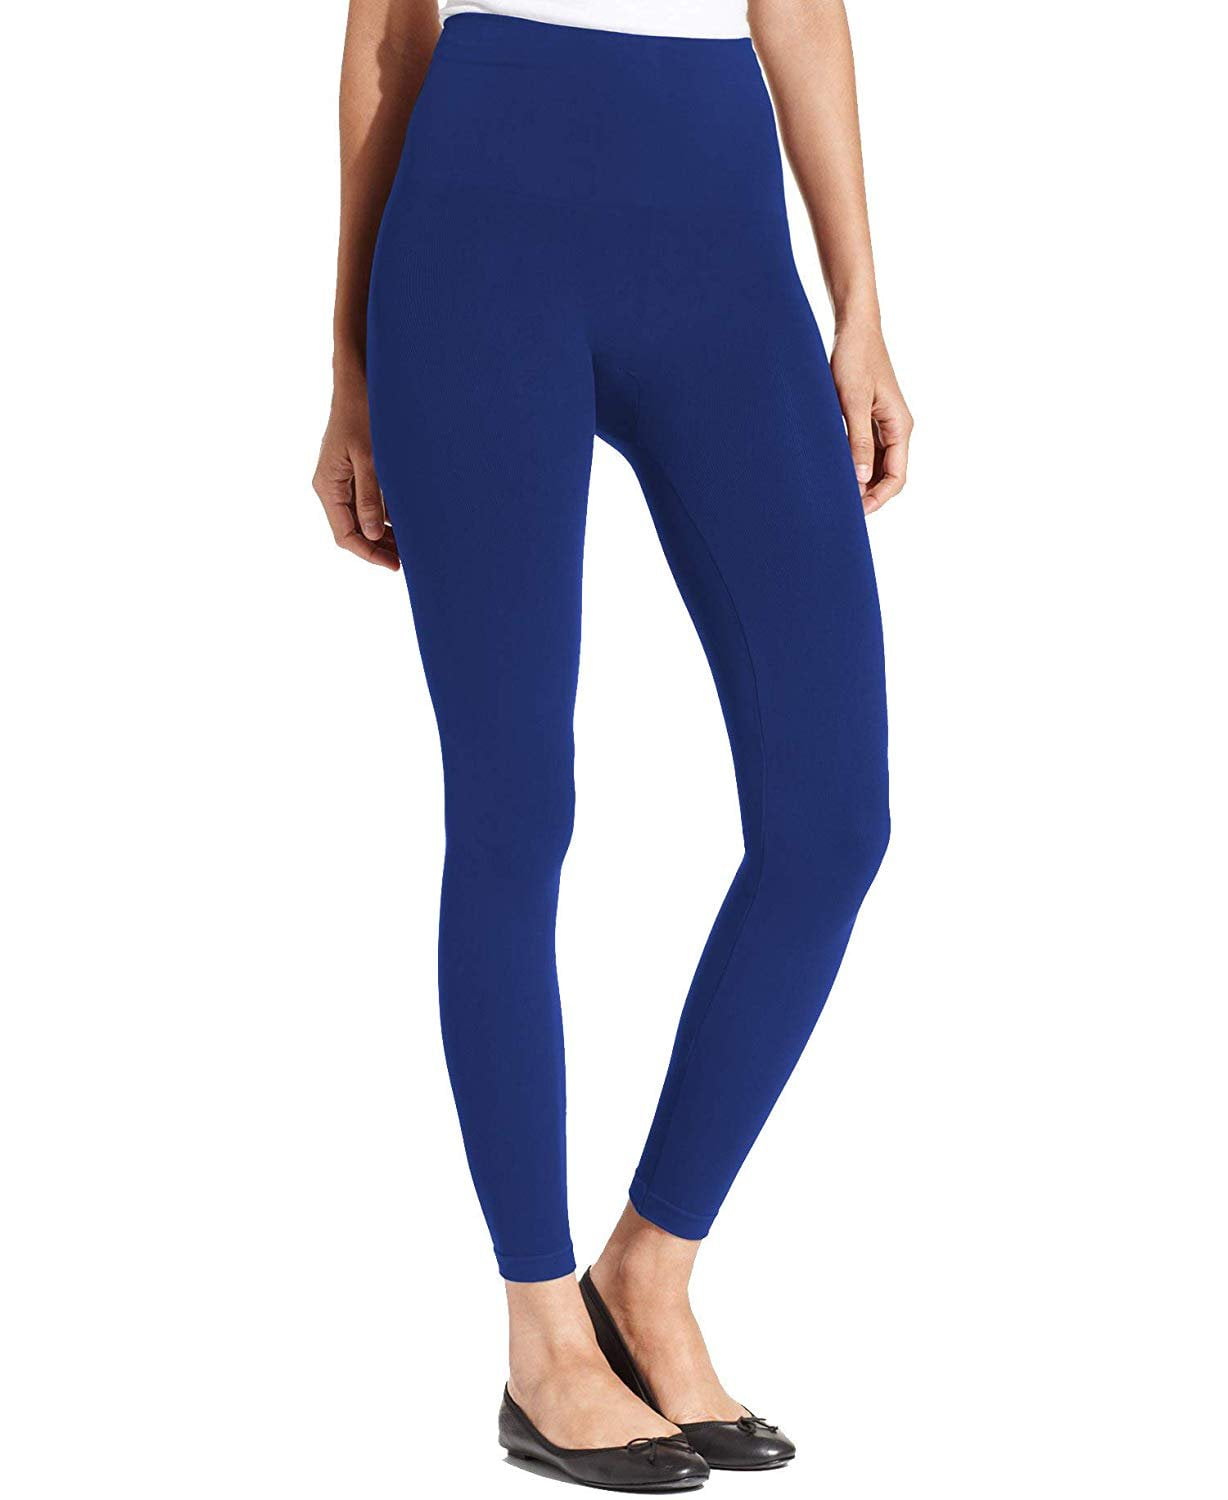 Spanx - Spanx Star Power Women's Leggings Tout & About Shaping ( Navy ...